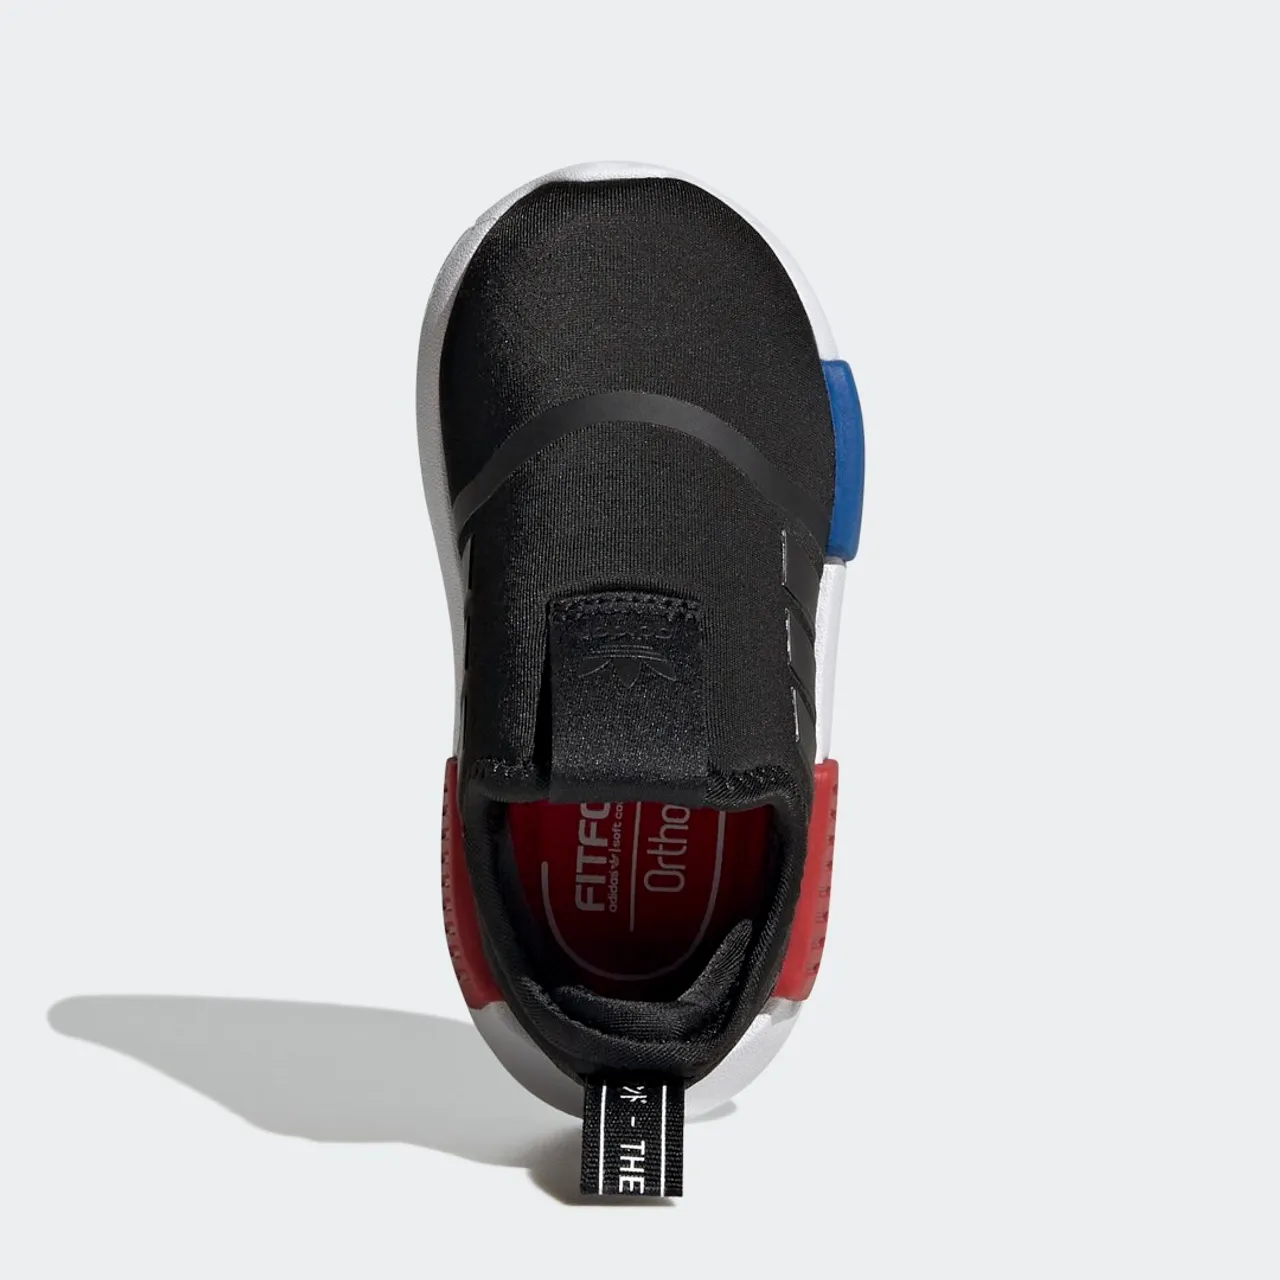 NMD 360 Shoes